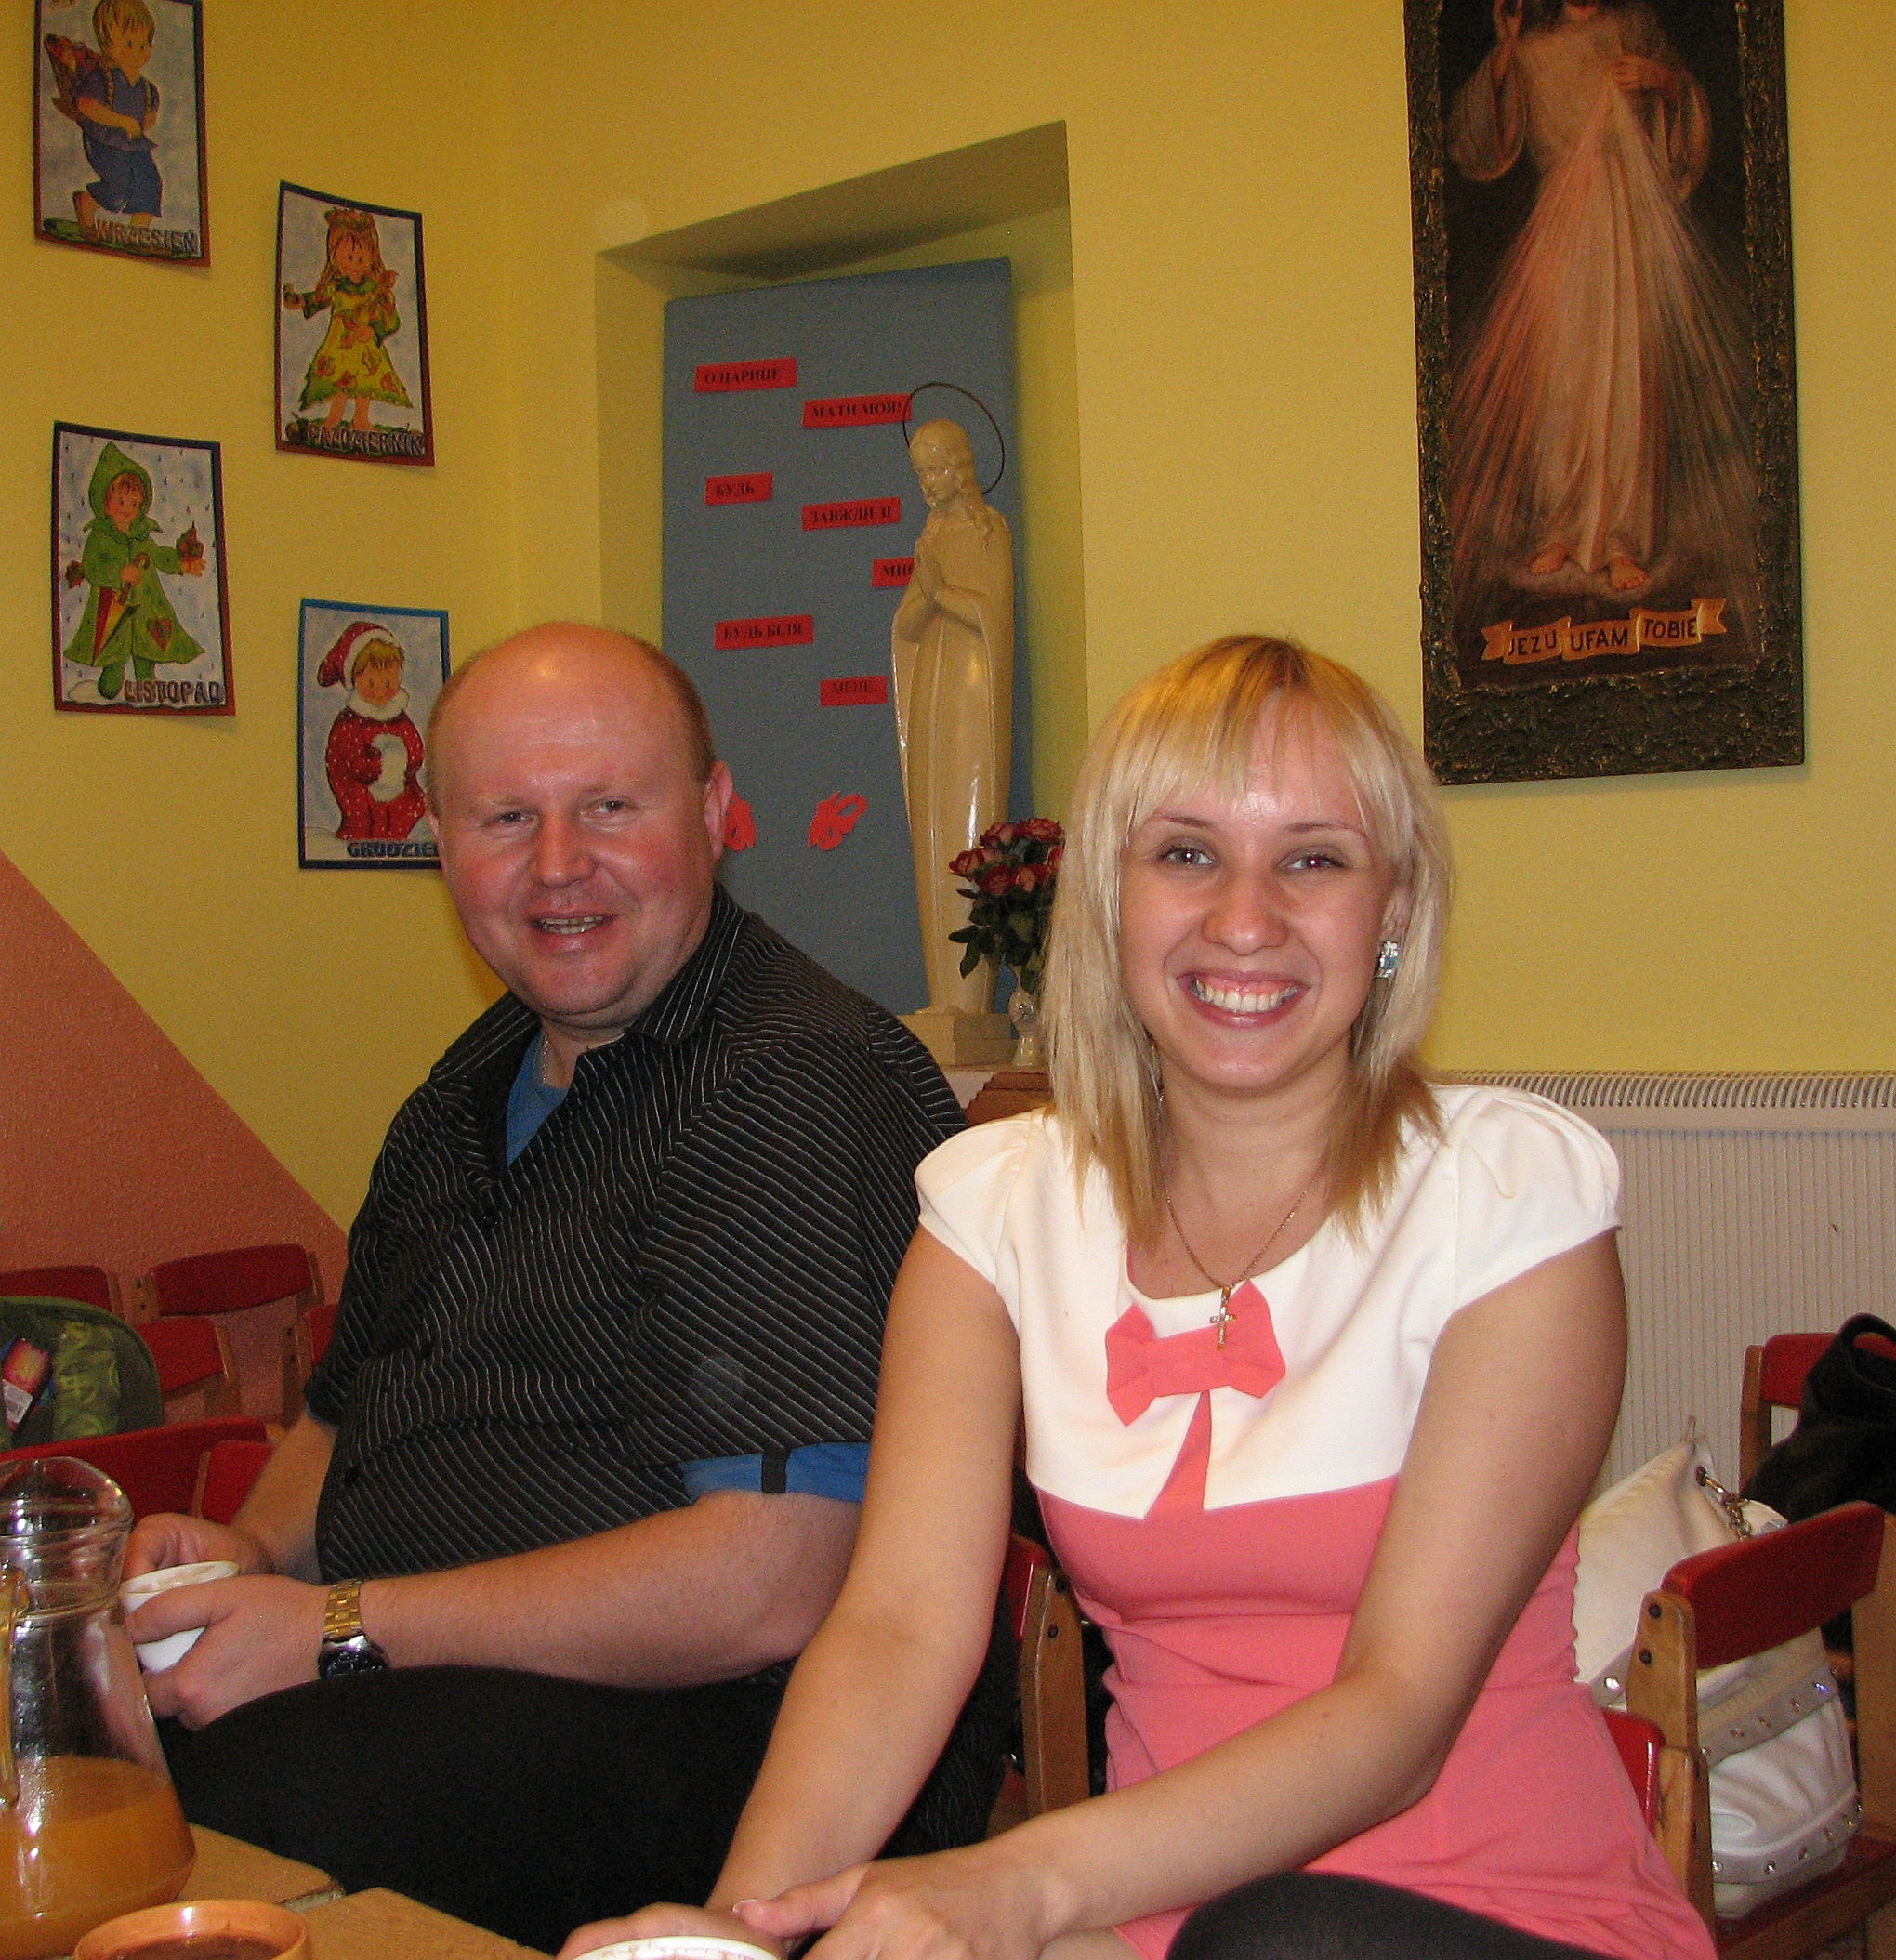 A man and a smiling blond Catholic woman